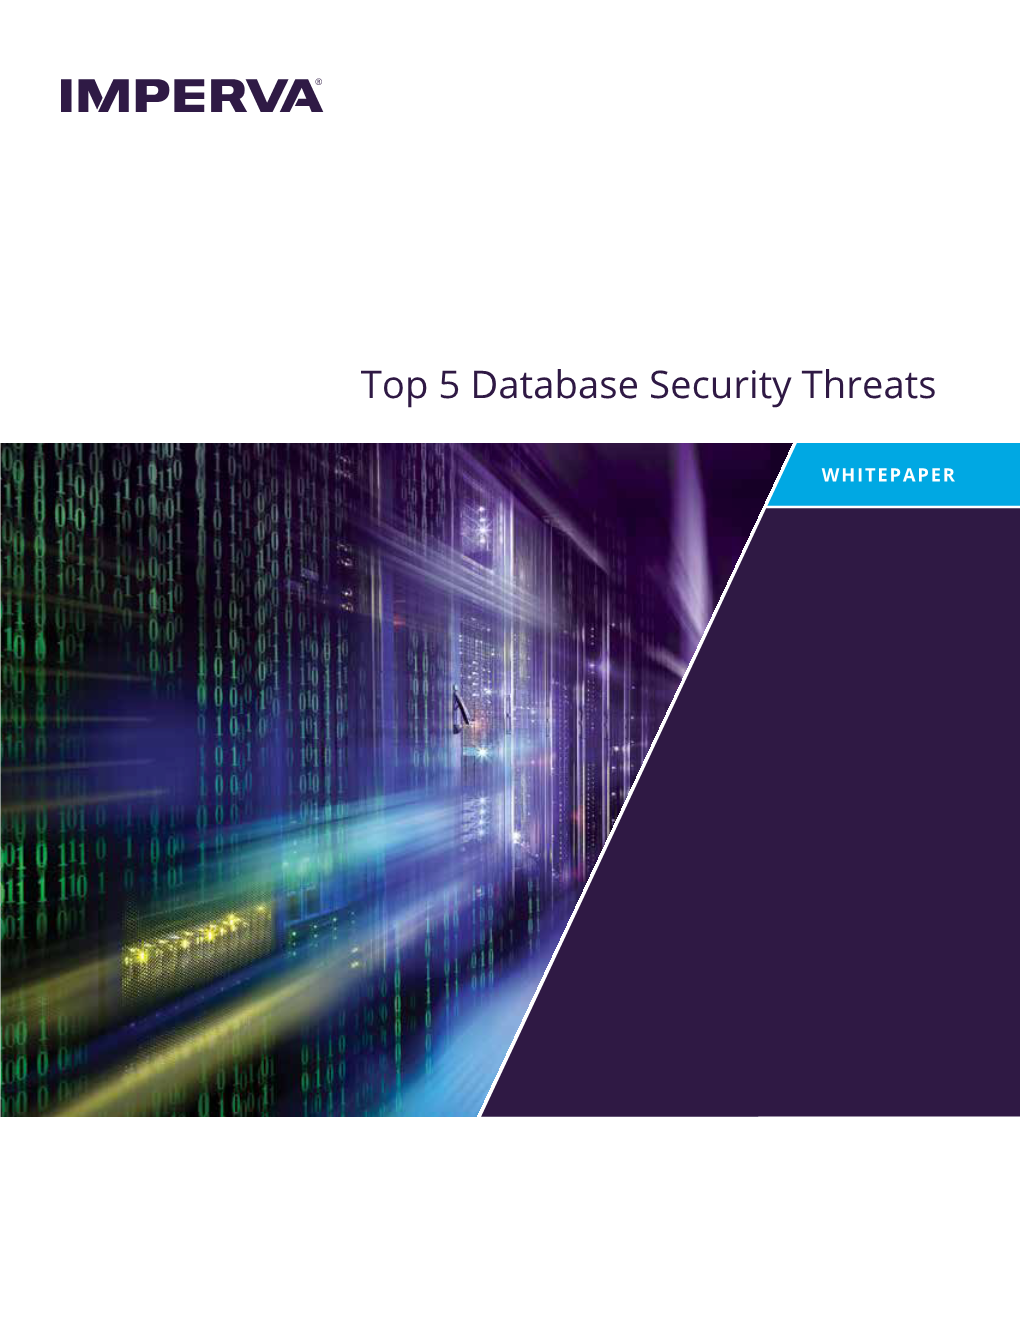 Top 5 Database Security Threats